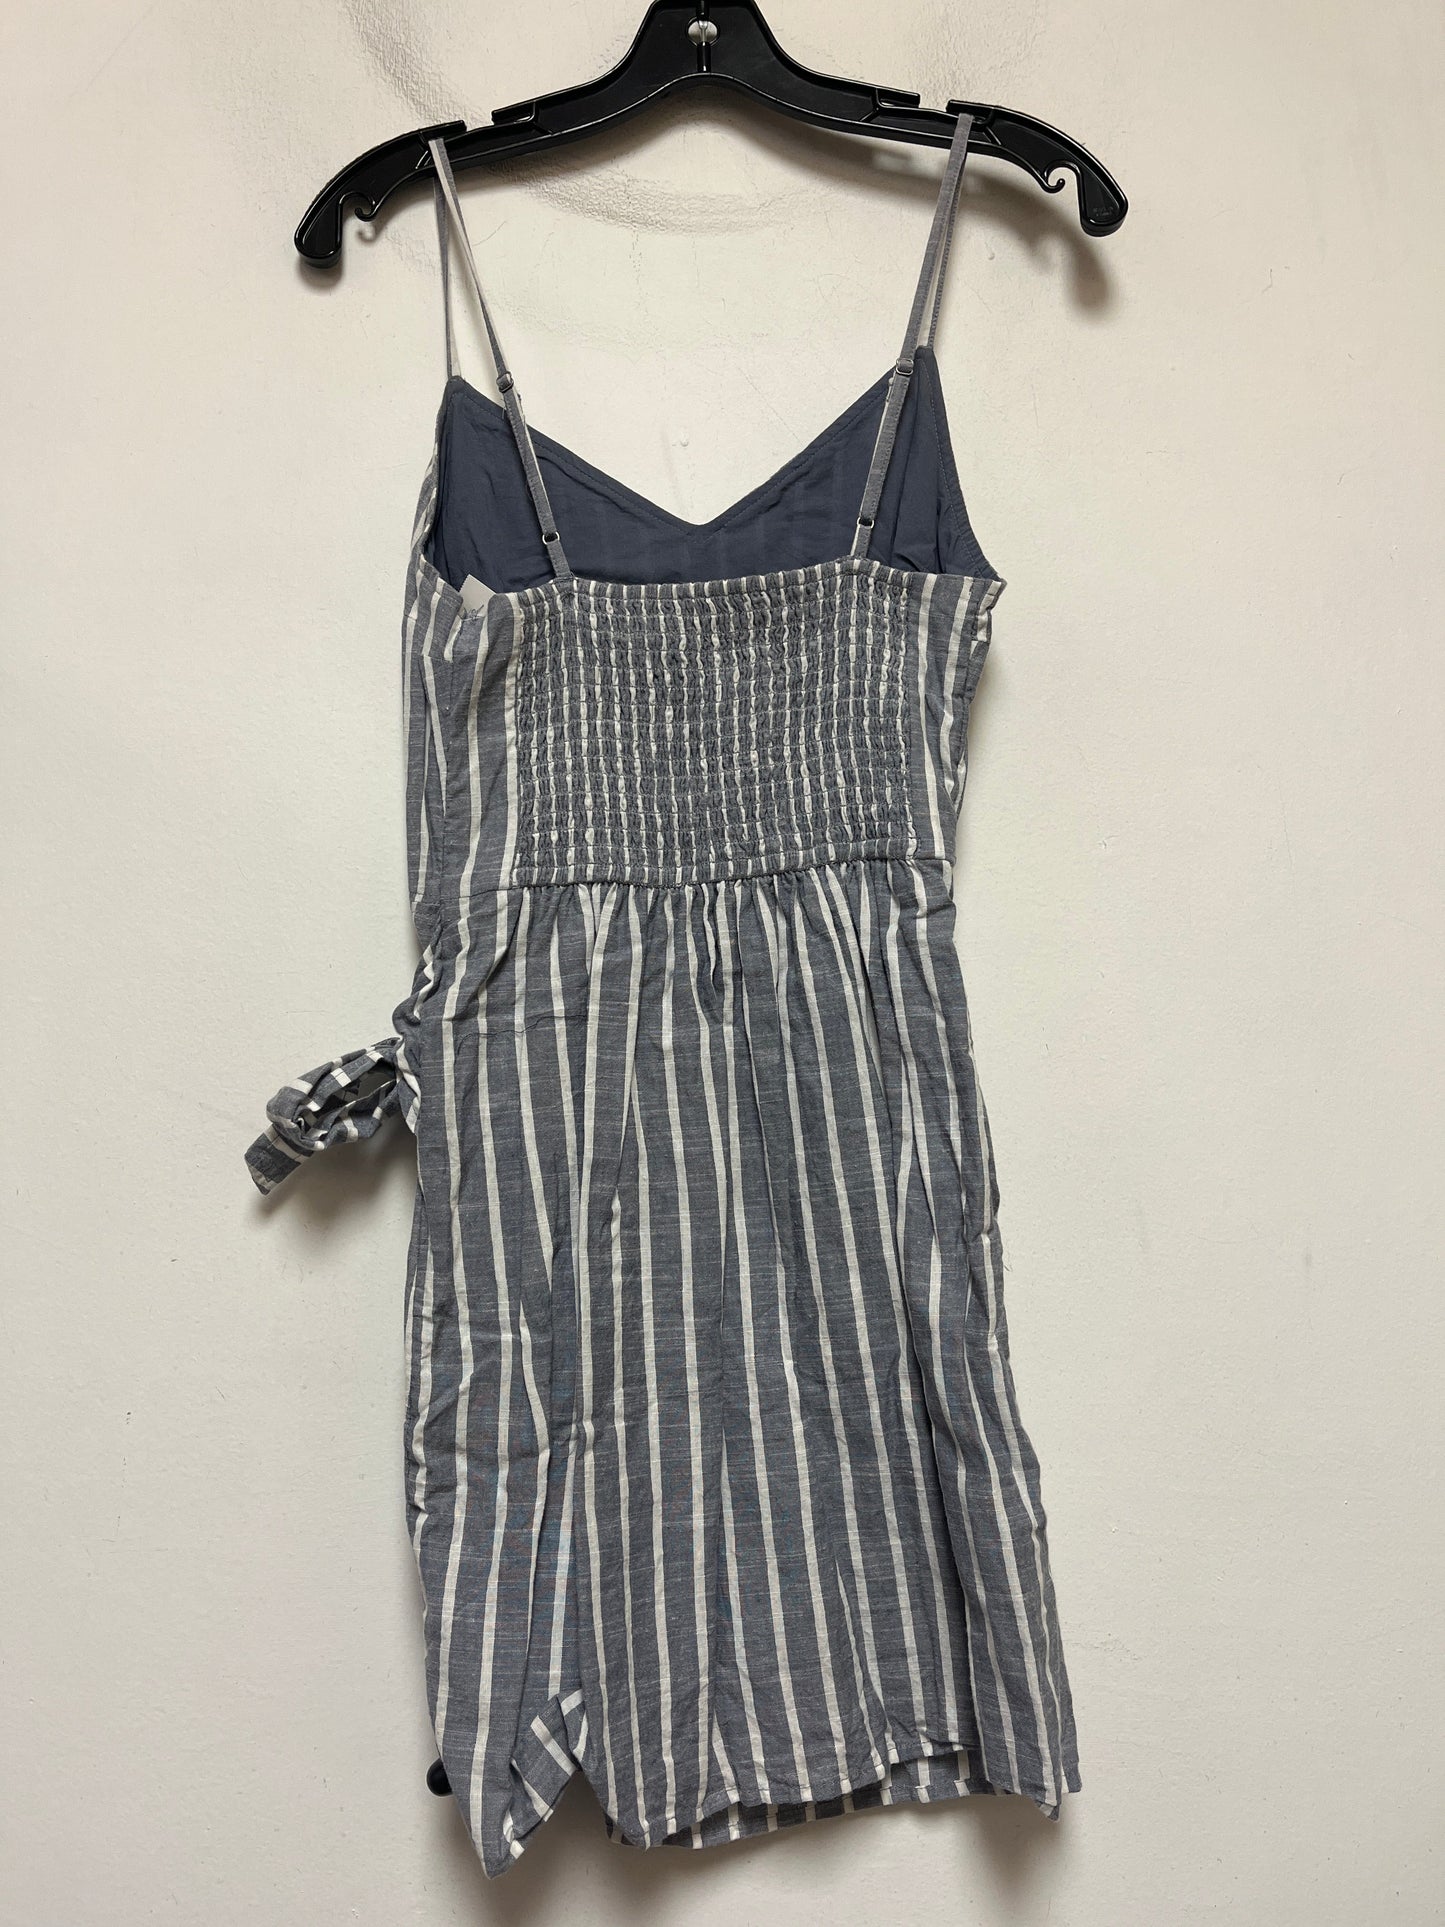 Striped Pattern Dress Casual Short Abercrombie And Fitch, Size S